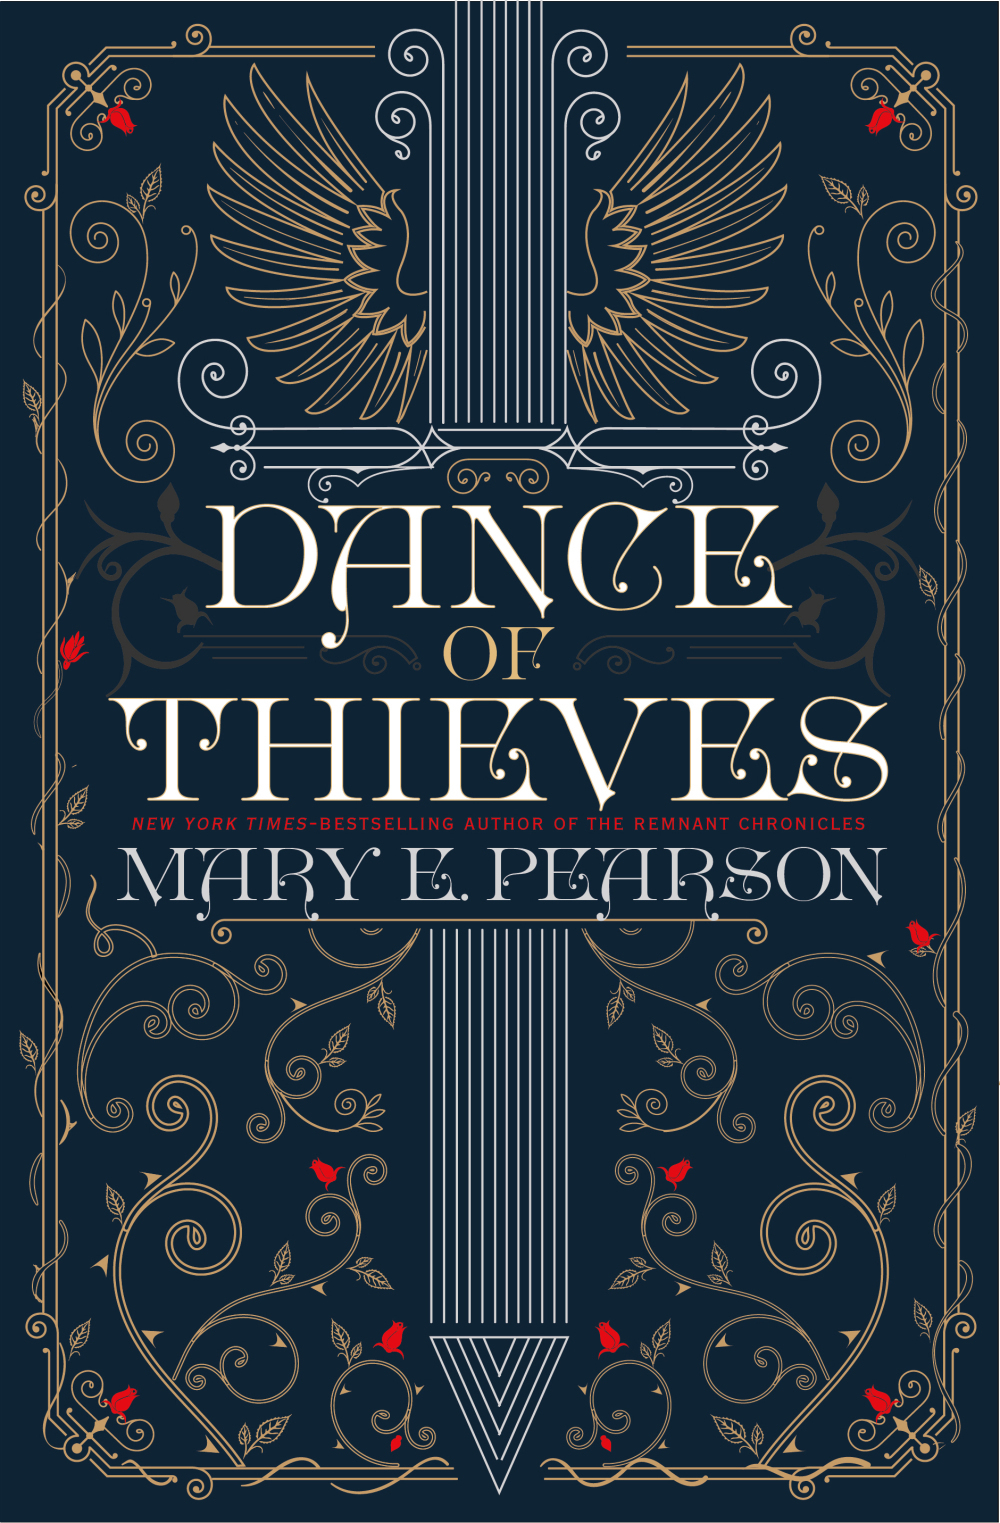 Dance of Thieves #1 by Mary E. Pearson PDF Download